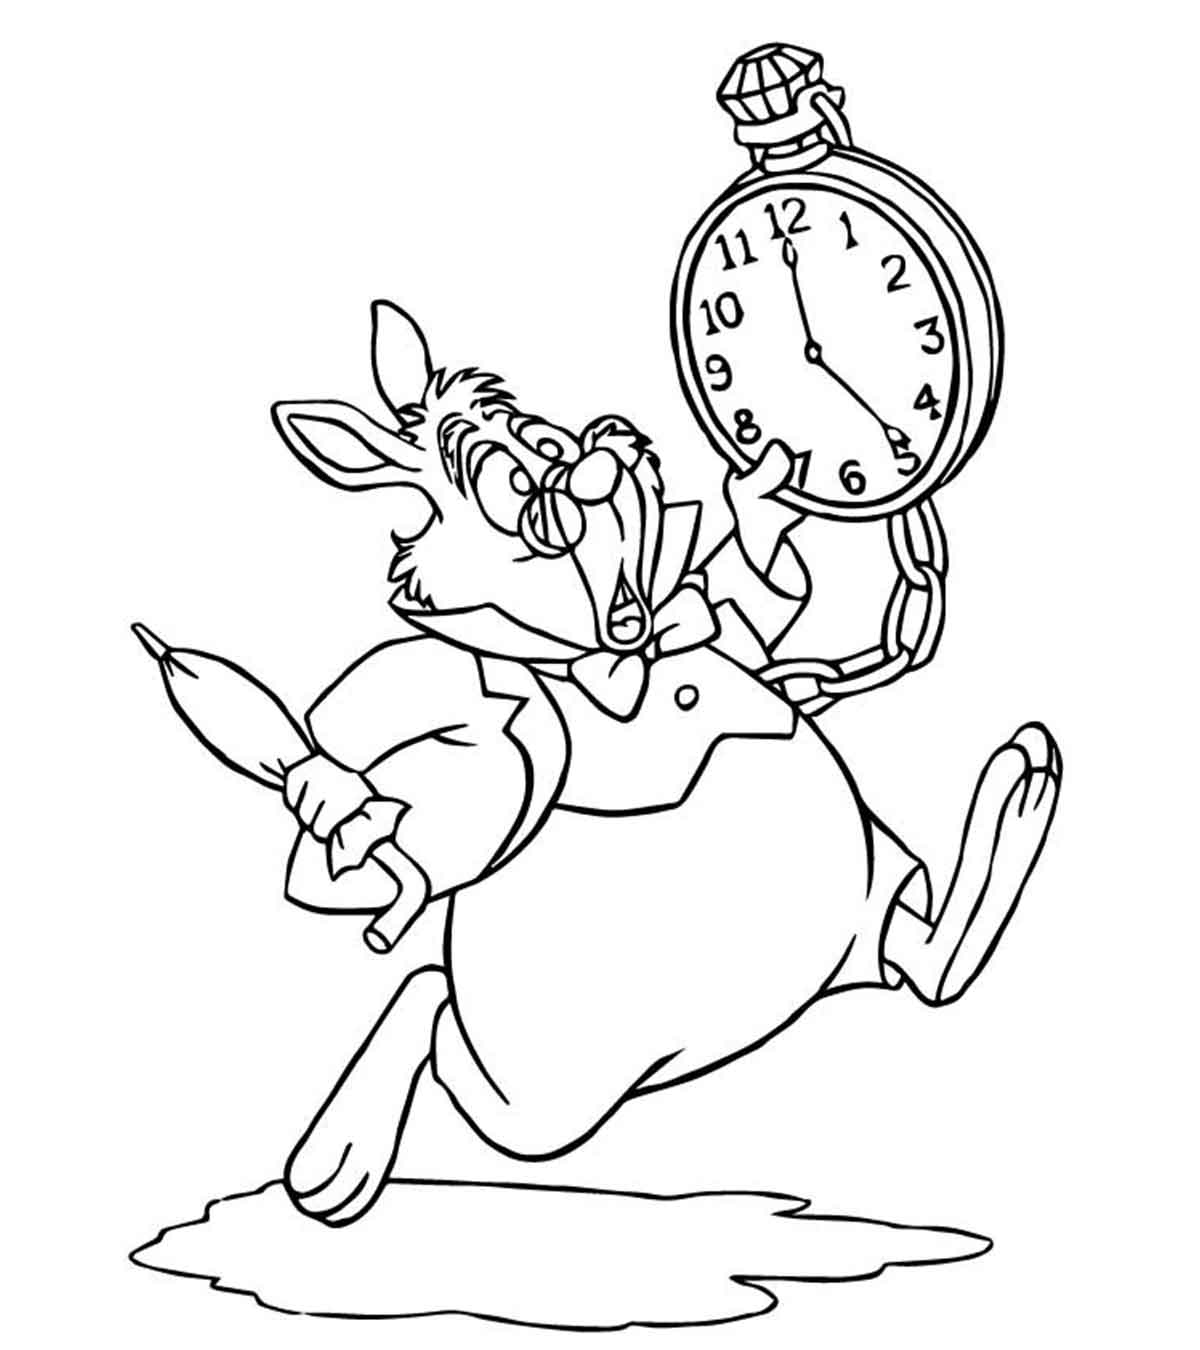 Top 10 Alice In Wonderland Coloring Pages For Your Little Princess_image